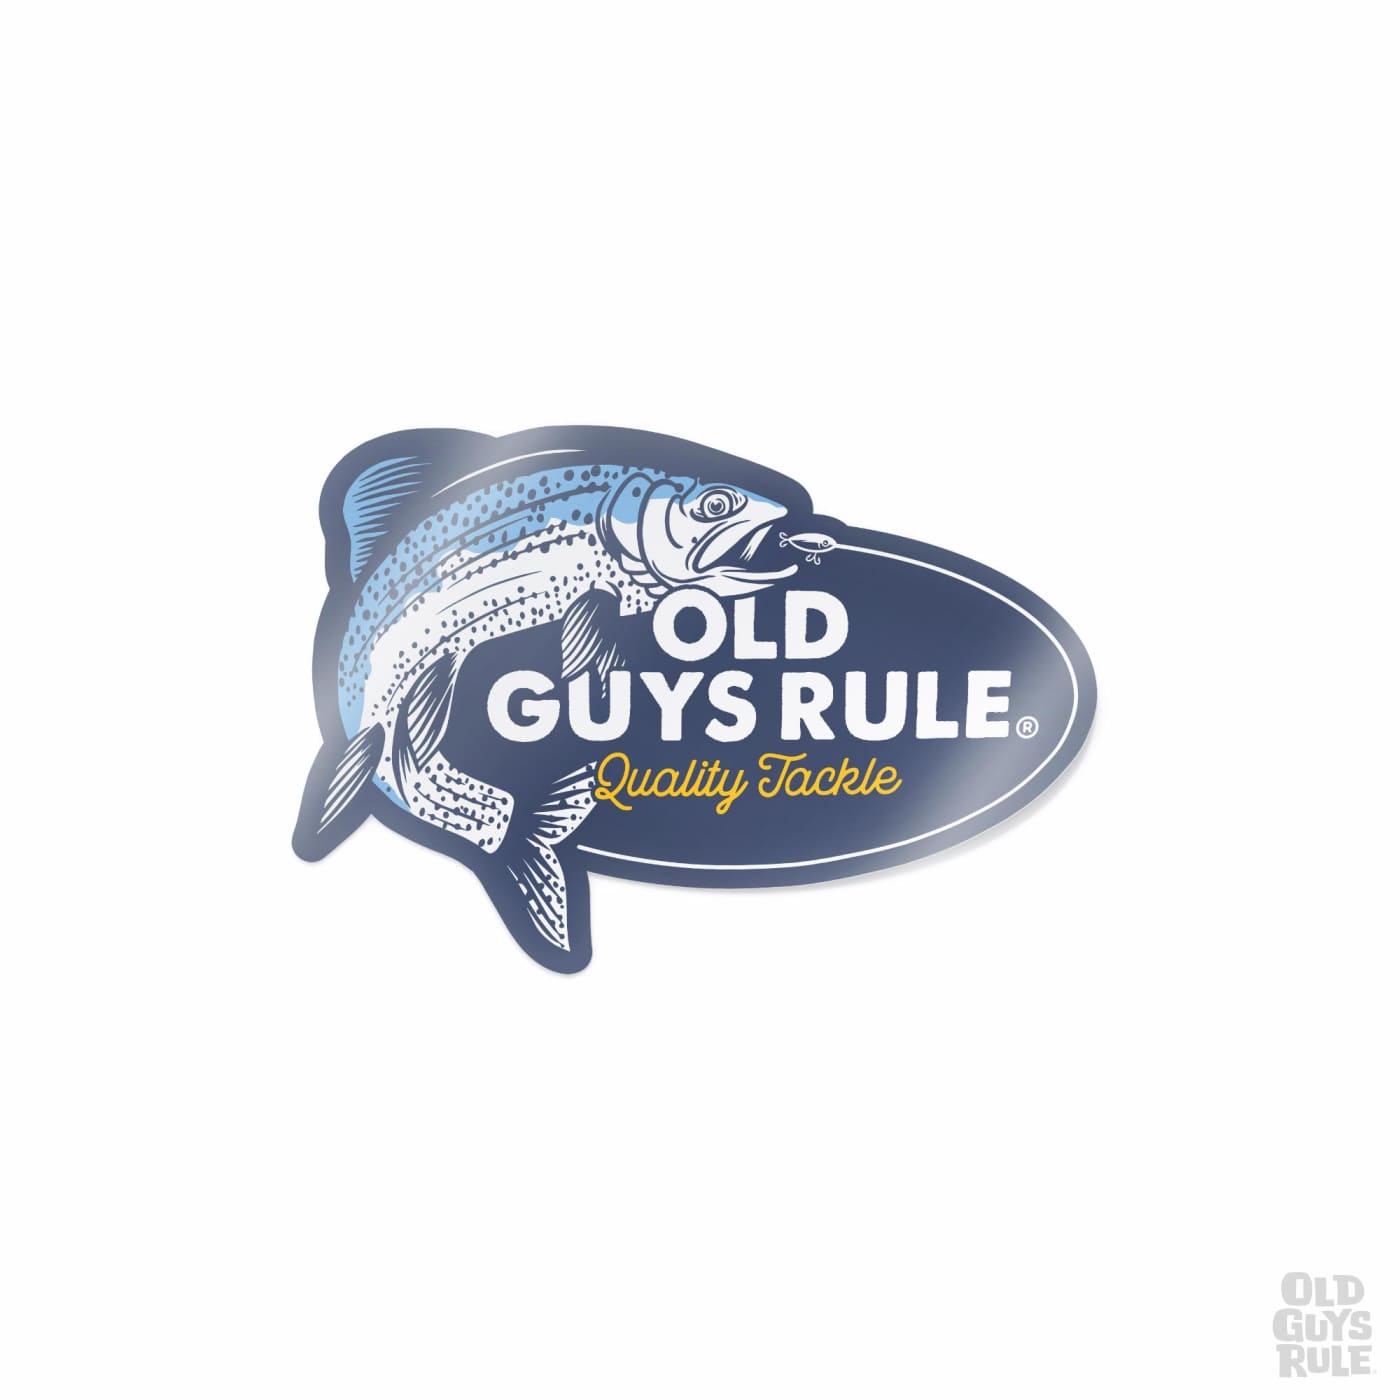 Old Guys Rule 'Quality Tackle' Decal